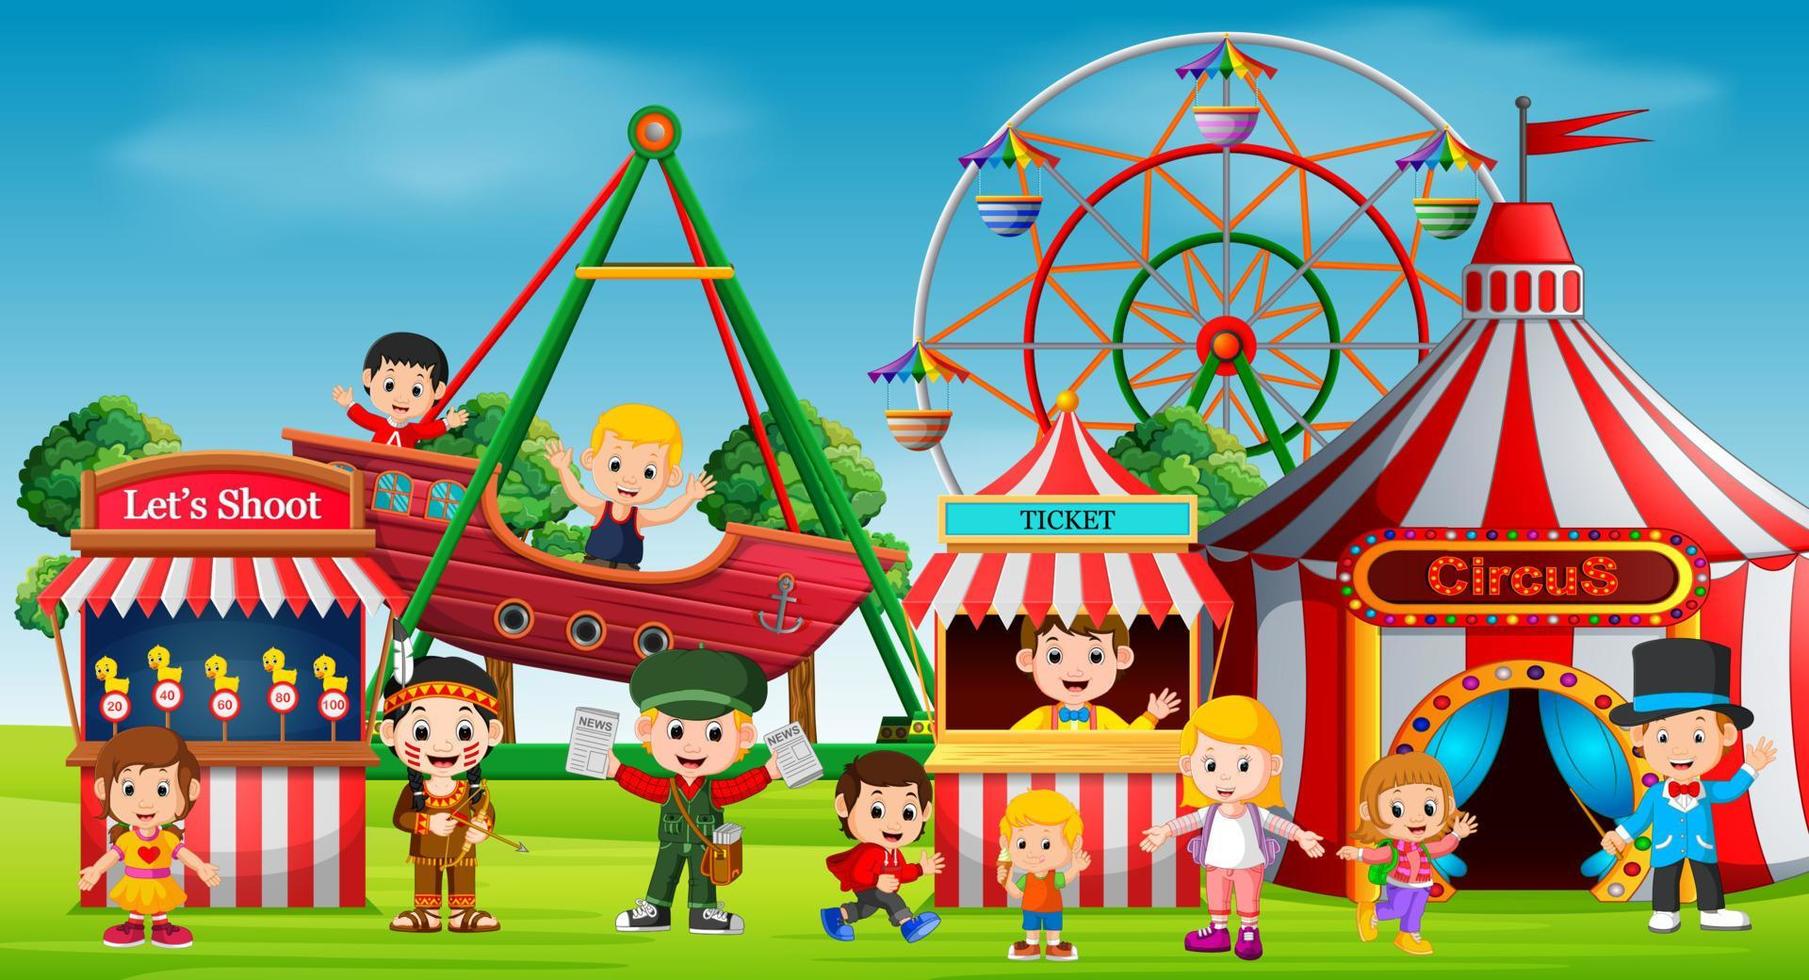 Childrens and having fun in amusement park vector